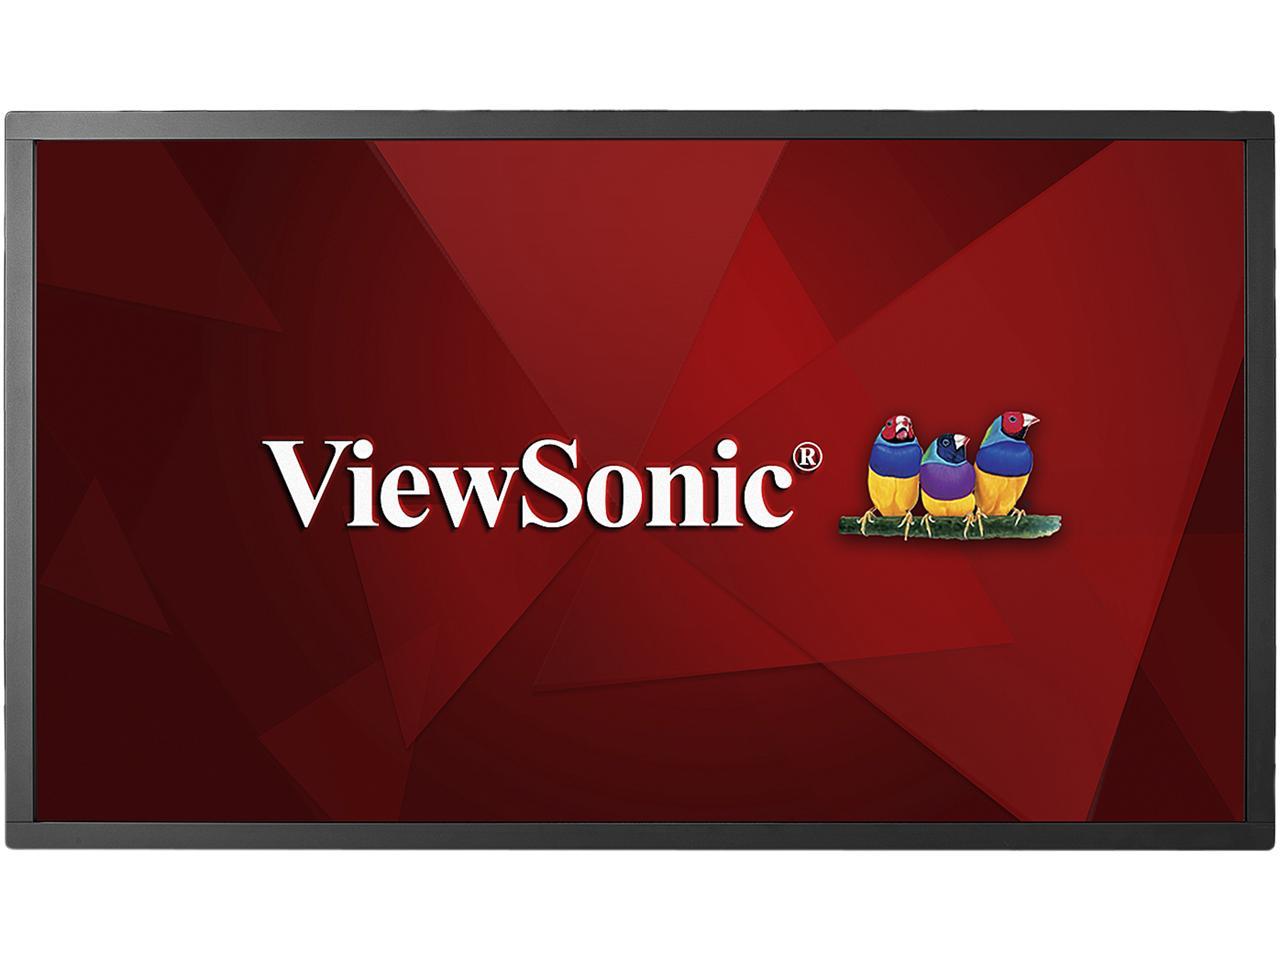 ViewSonic CDM4300T 43" Edge-lit Interactive Digital Signage with Integrated 10-Point Multi-touch and Built-in 16GB Quad Core Media Player